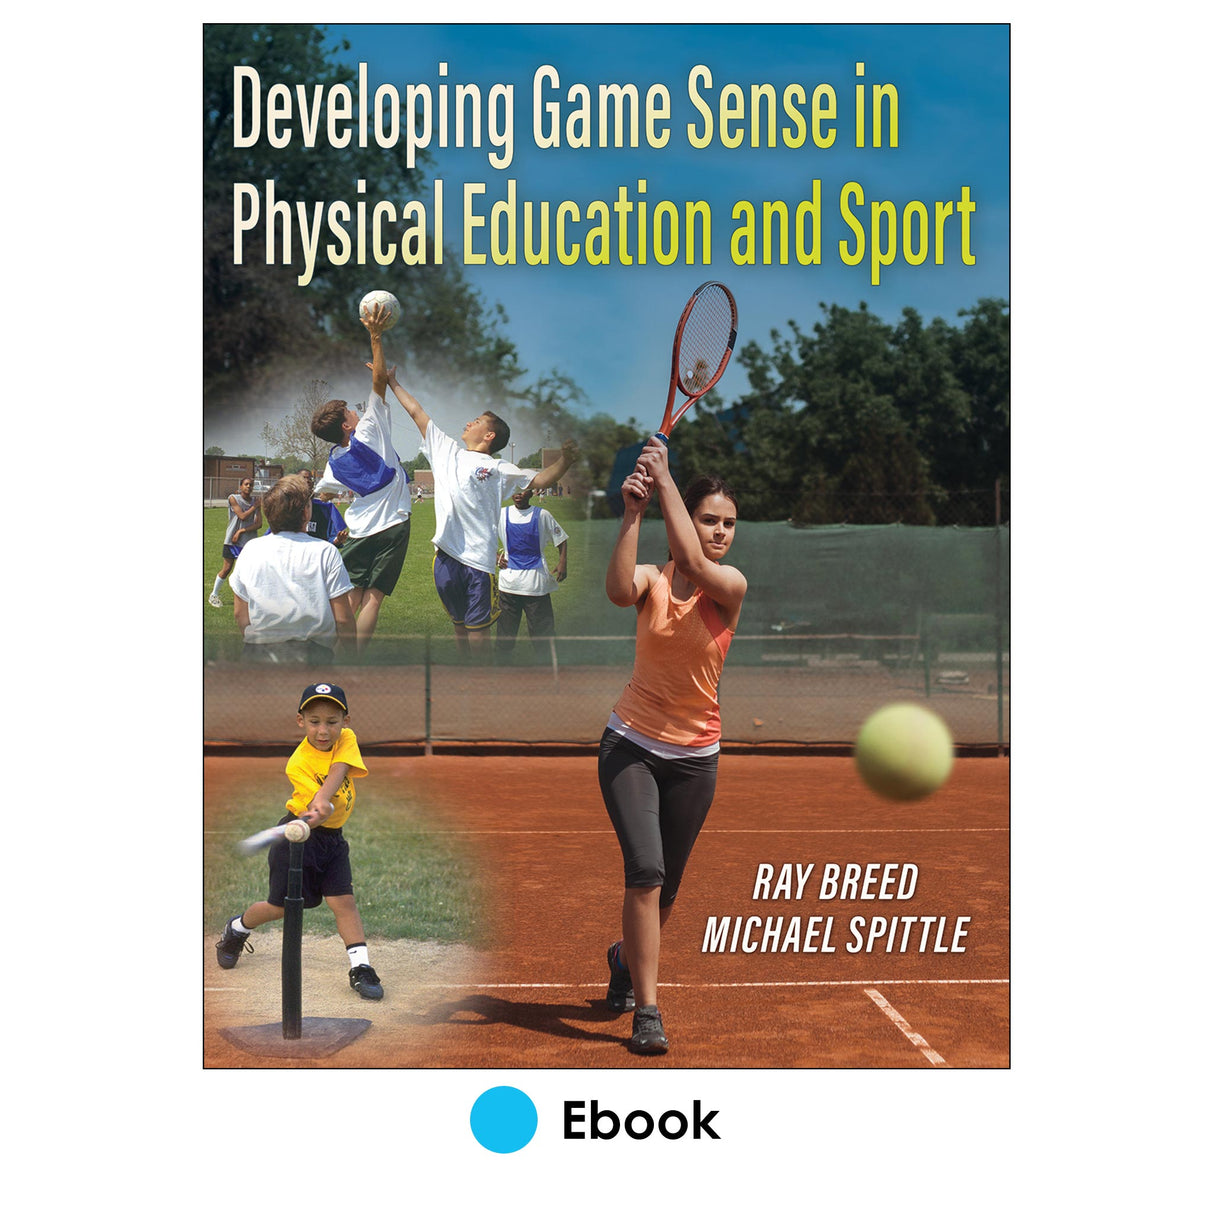 Developing Game Sense in Physical Education and Sport epub